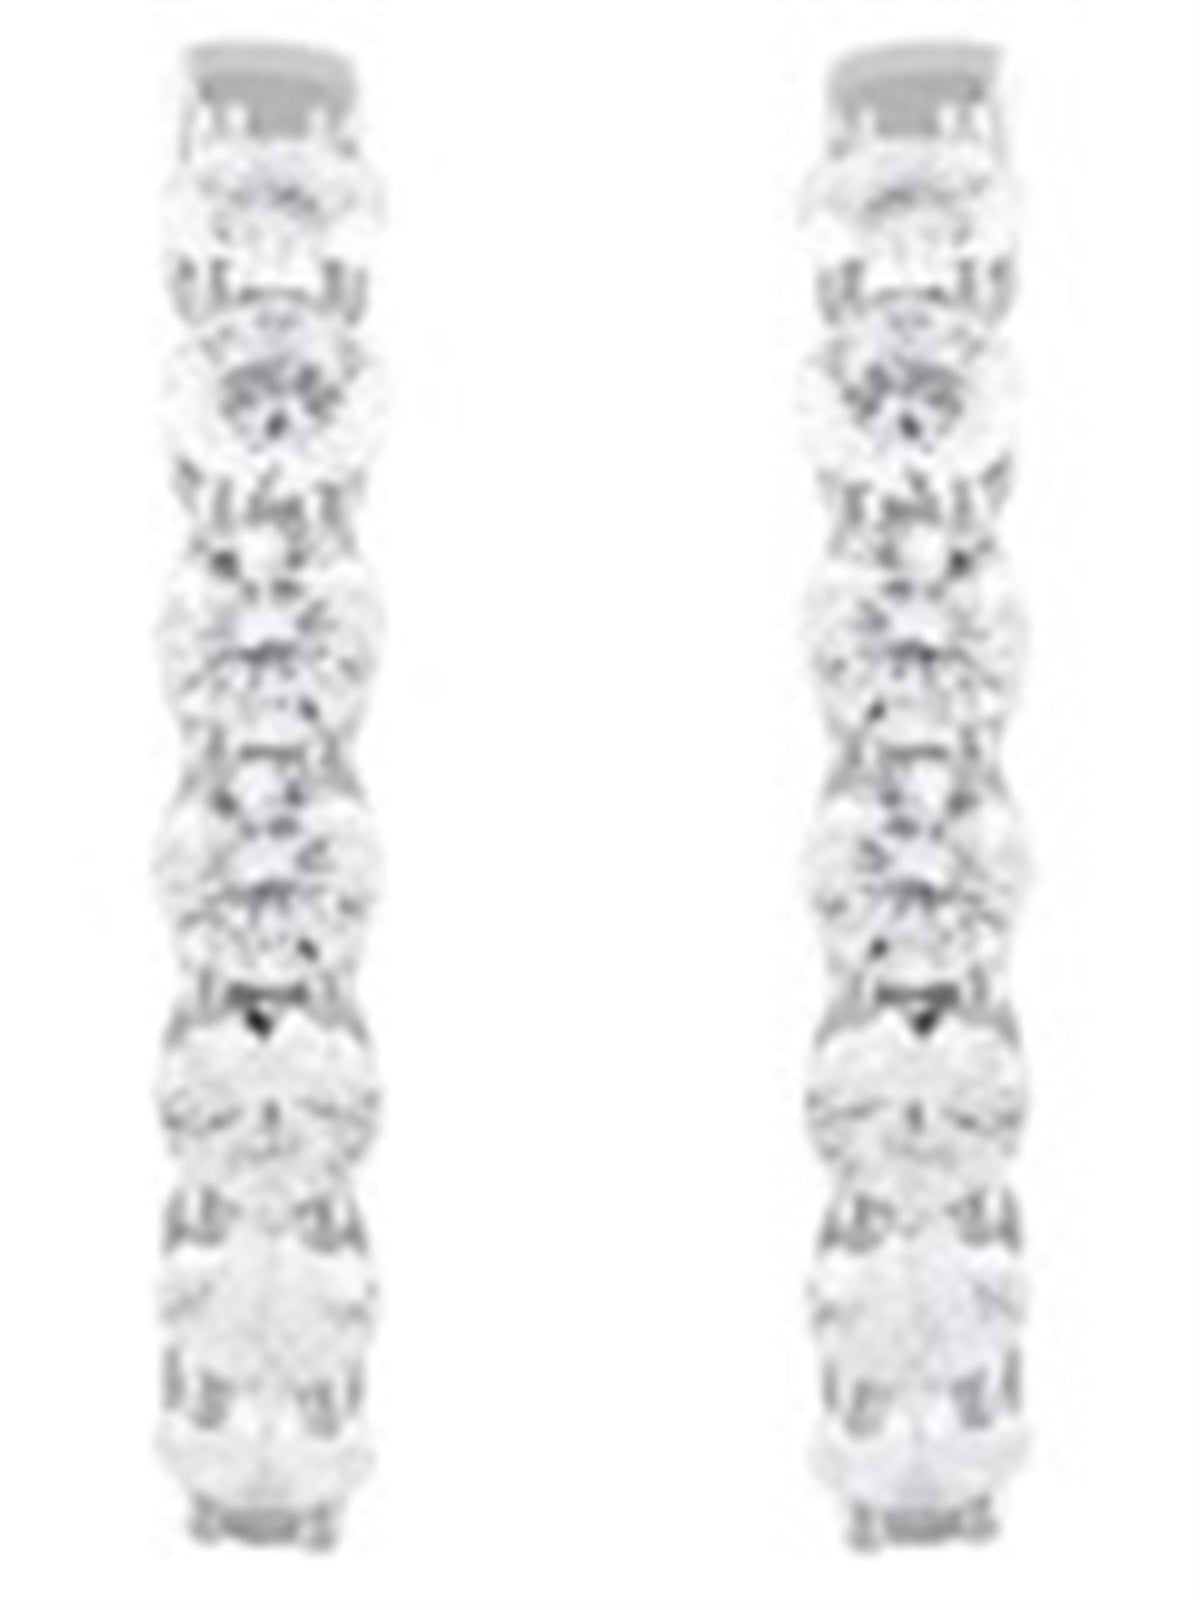 14Kt White Gold Oval Hoop Earrings With 8.00cttw Lab-Grown Diamonds